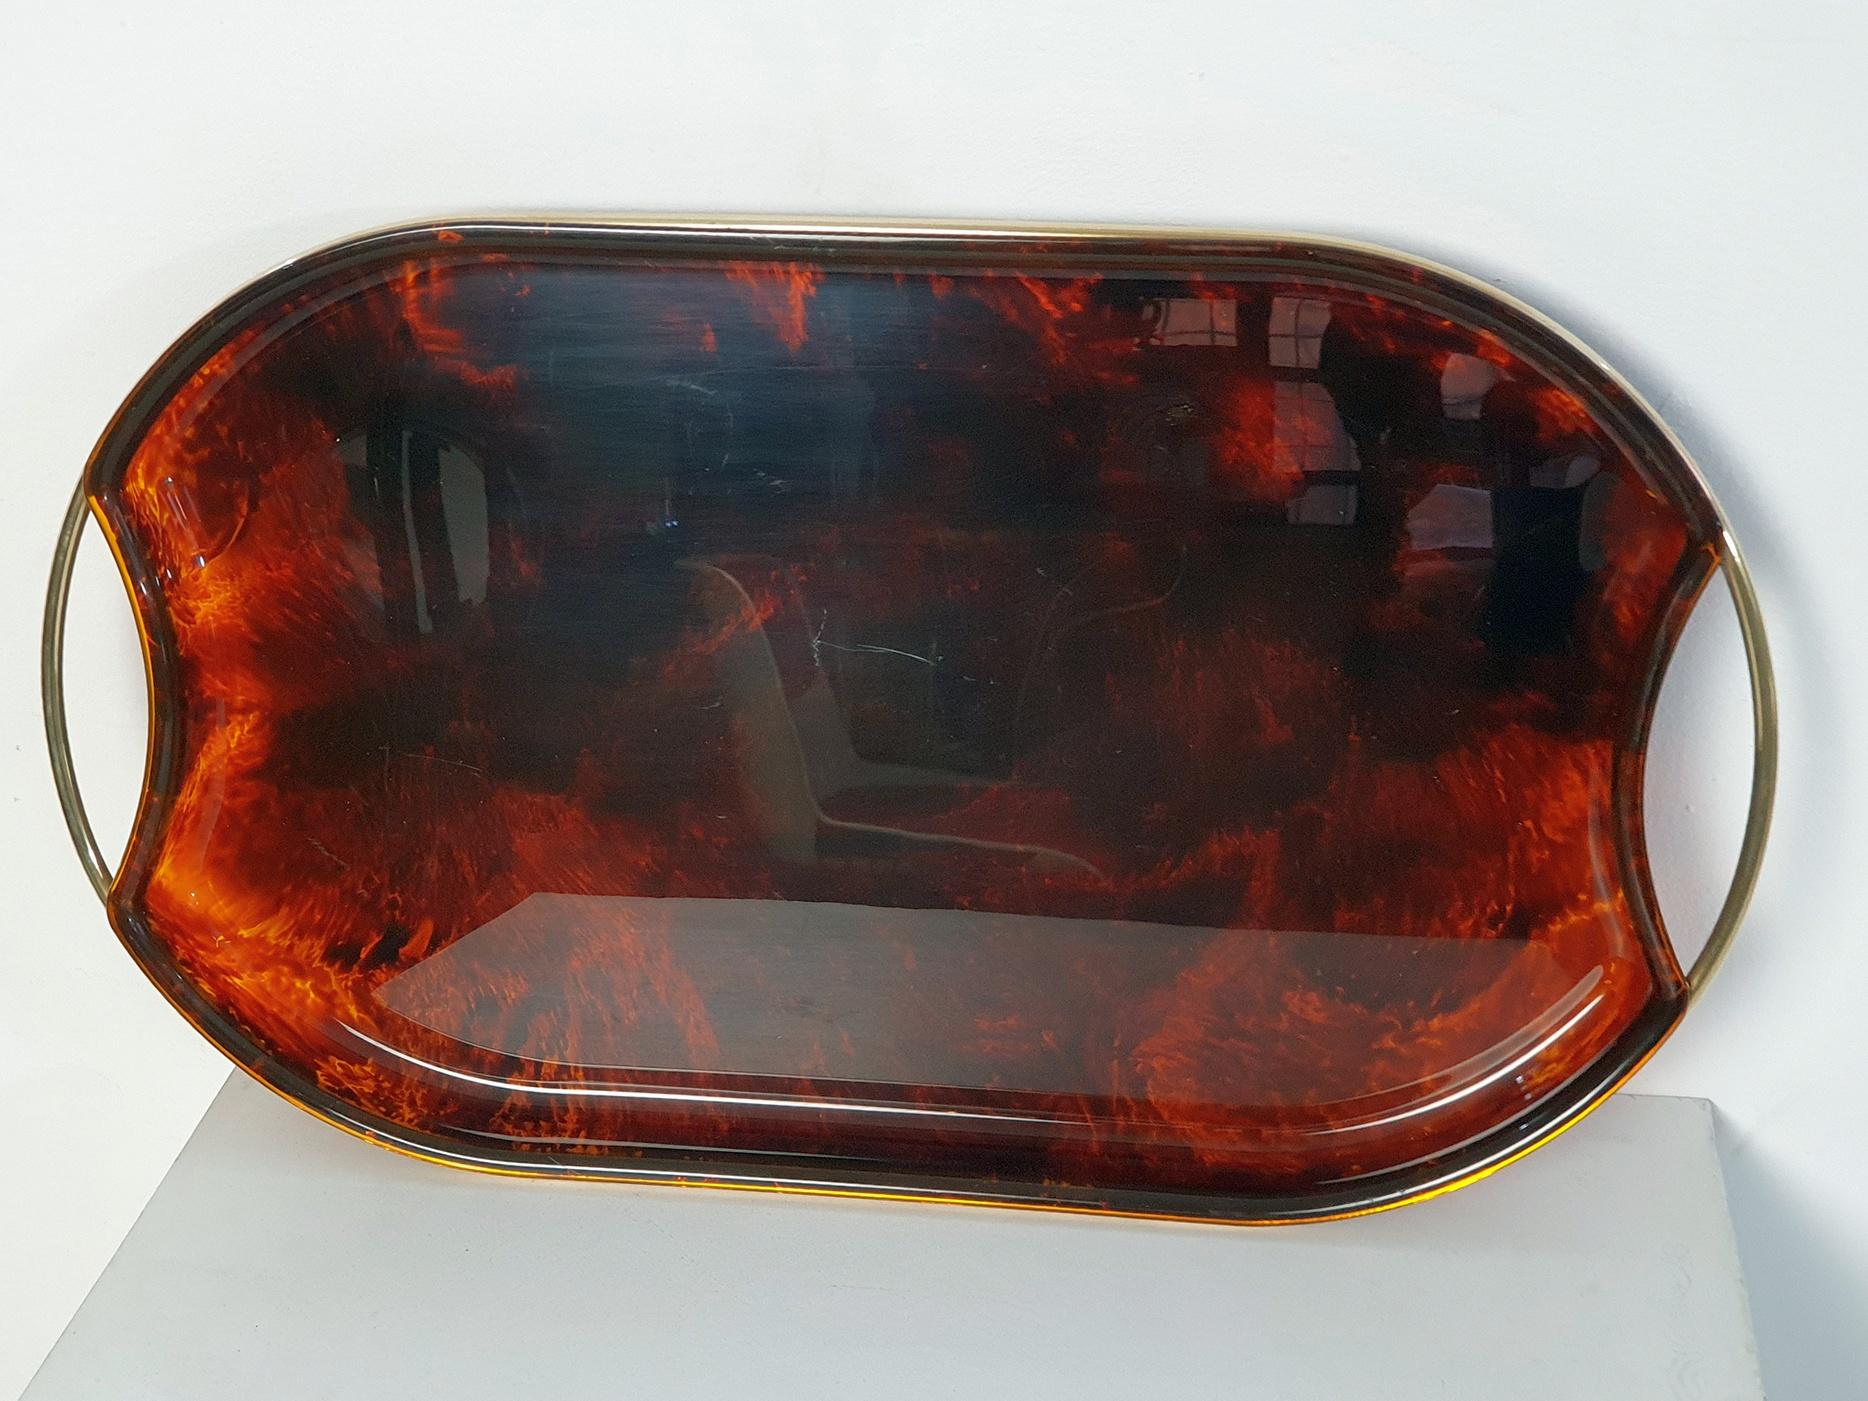 Italian oval vintage serving tray in Lucite with tortoise pattern and brass handles. Very good condition with minor scratches.